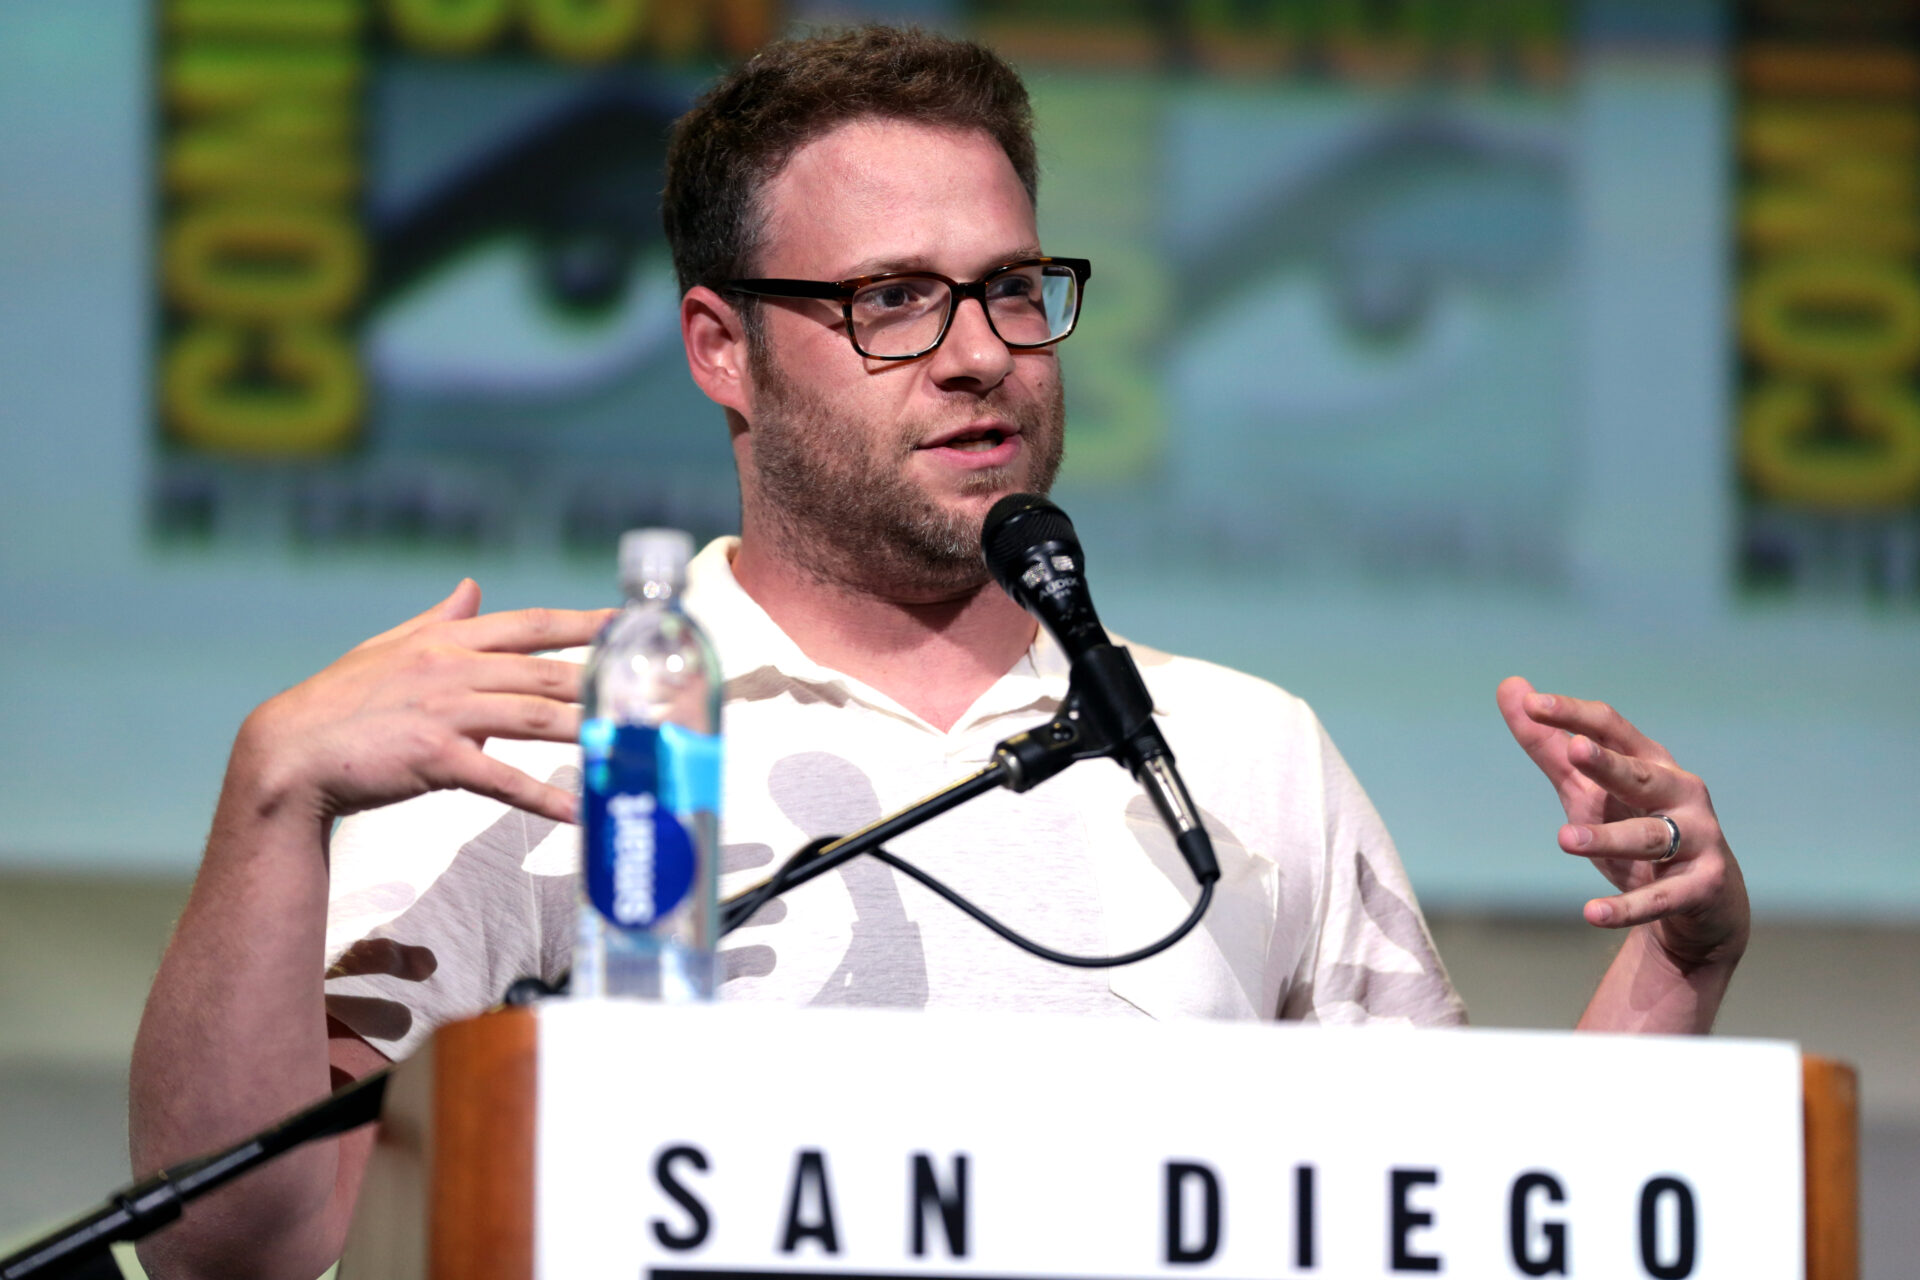 Seth Rogen speaking at the 2016 San Diego Comic Con International, for "Preacher", at the San Diego Convention Center in San Diego, California.Photo Credit: Gage Skidmore